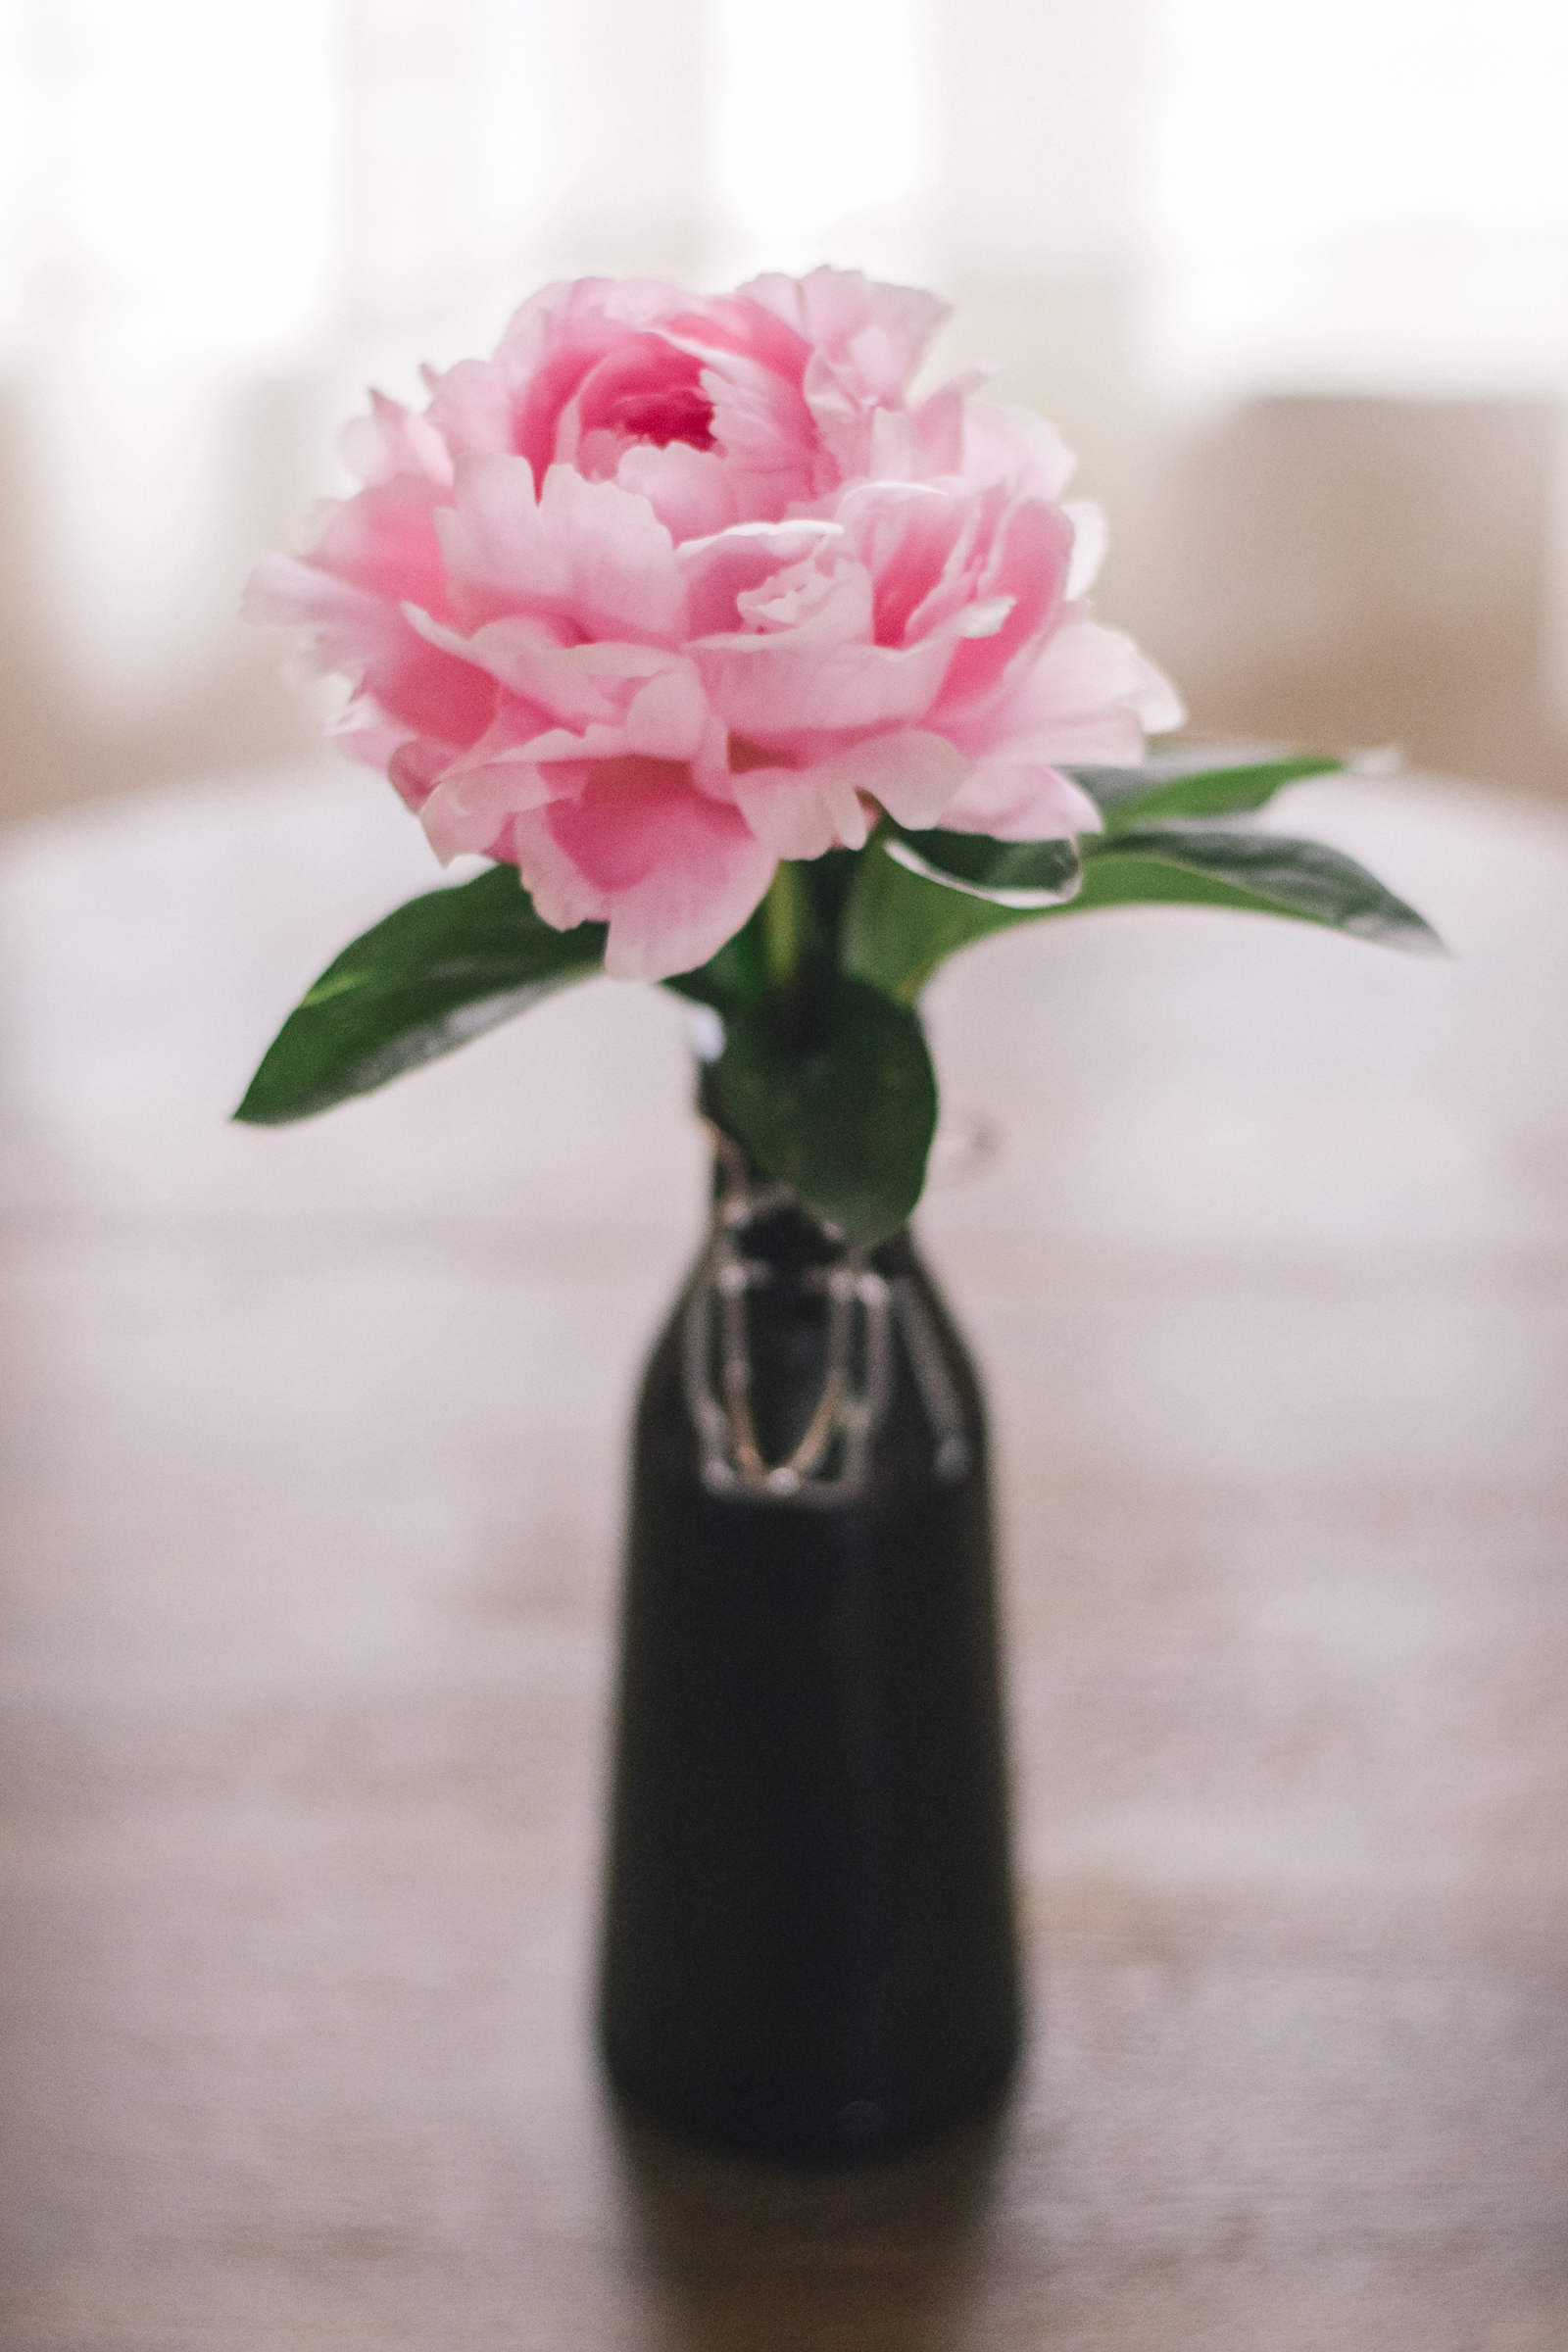 pretty pink peonies, how i miss you already!